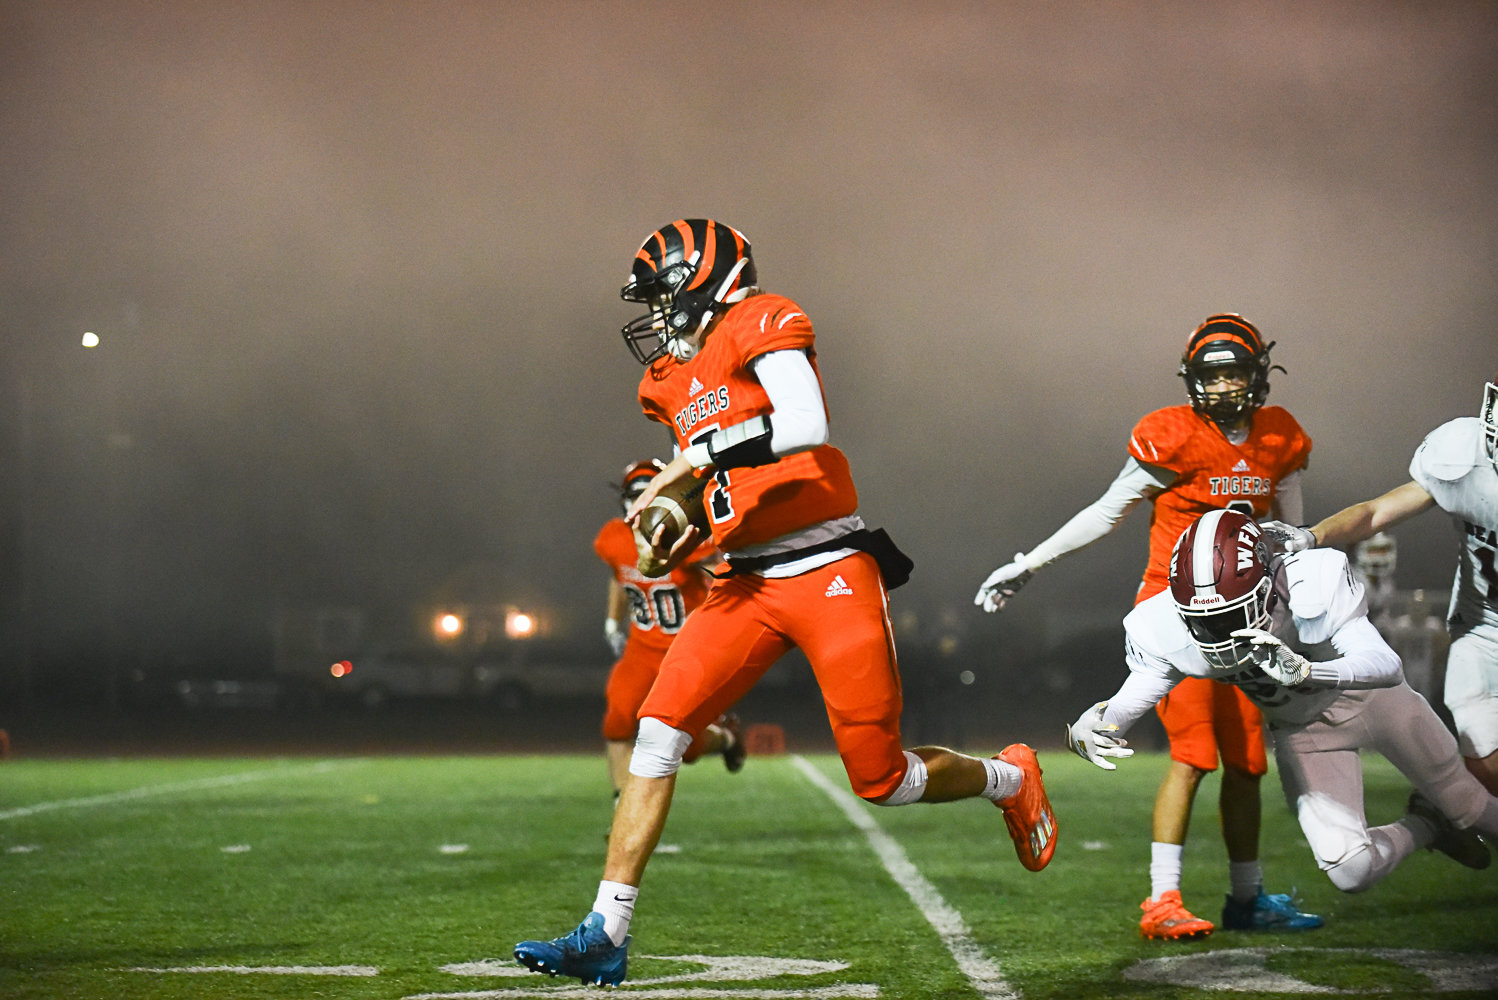 Centralia quarterback Tommy Billings runs through the fog and the W.F. West defense in the fourth quarter of the Tigers' 55-7 loss to the Bearcats on Oct. 28 at Tiger Stadium.